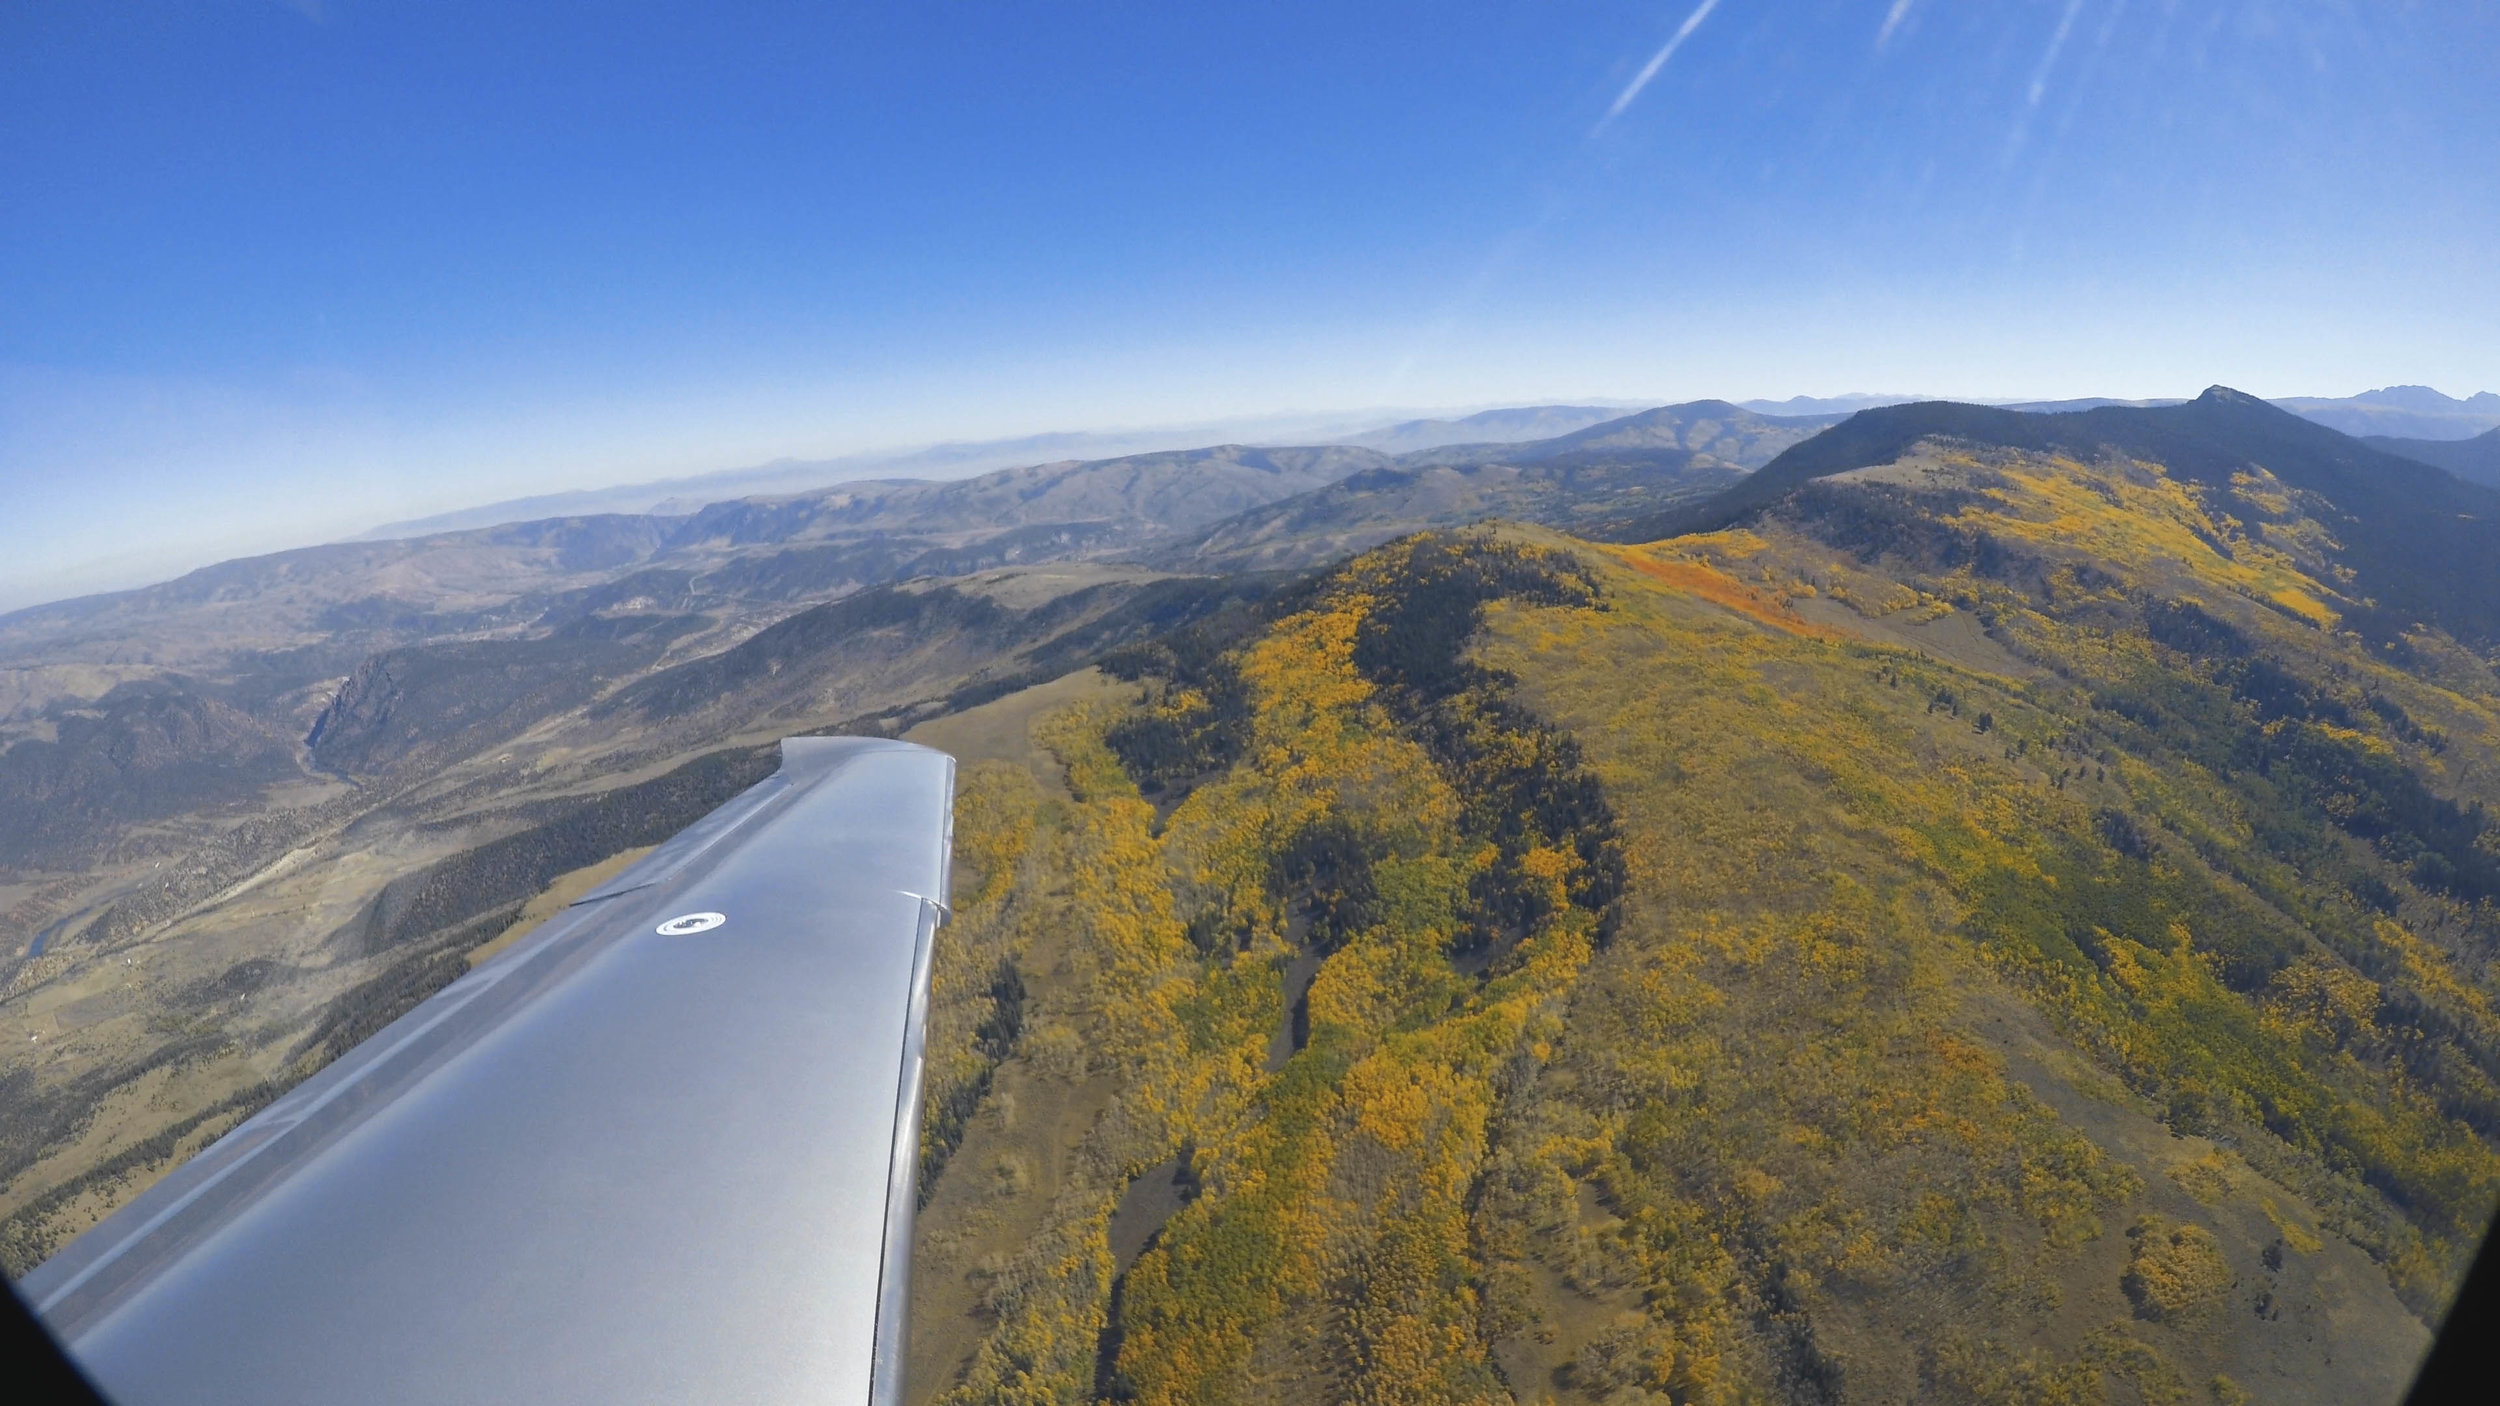 Let’s go flying to the mountains this fall!